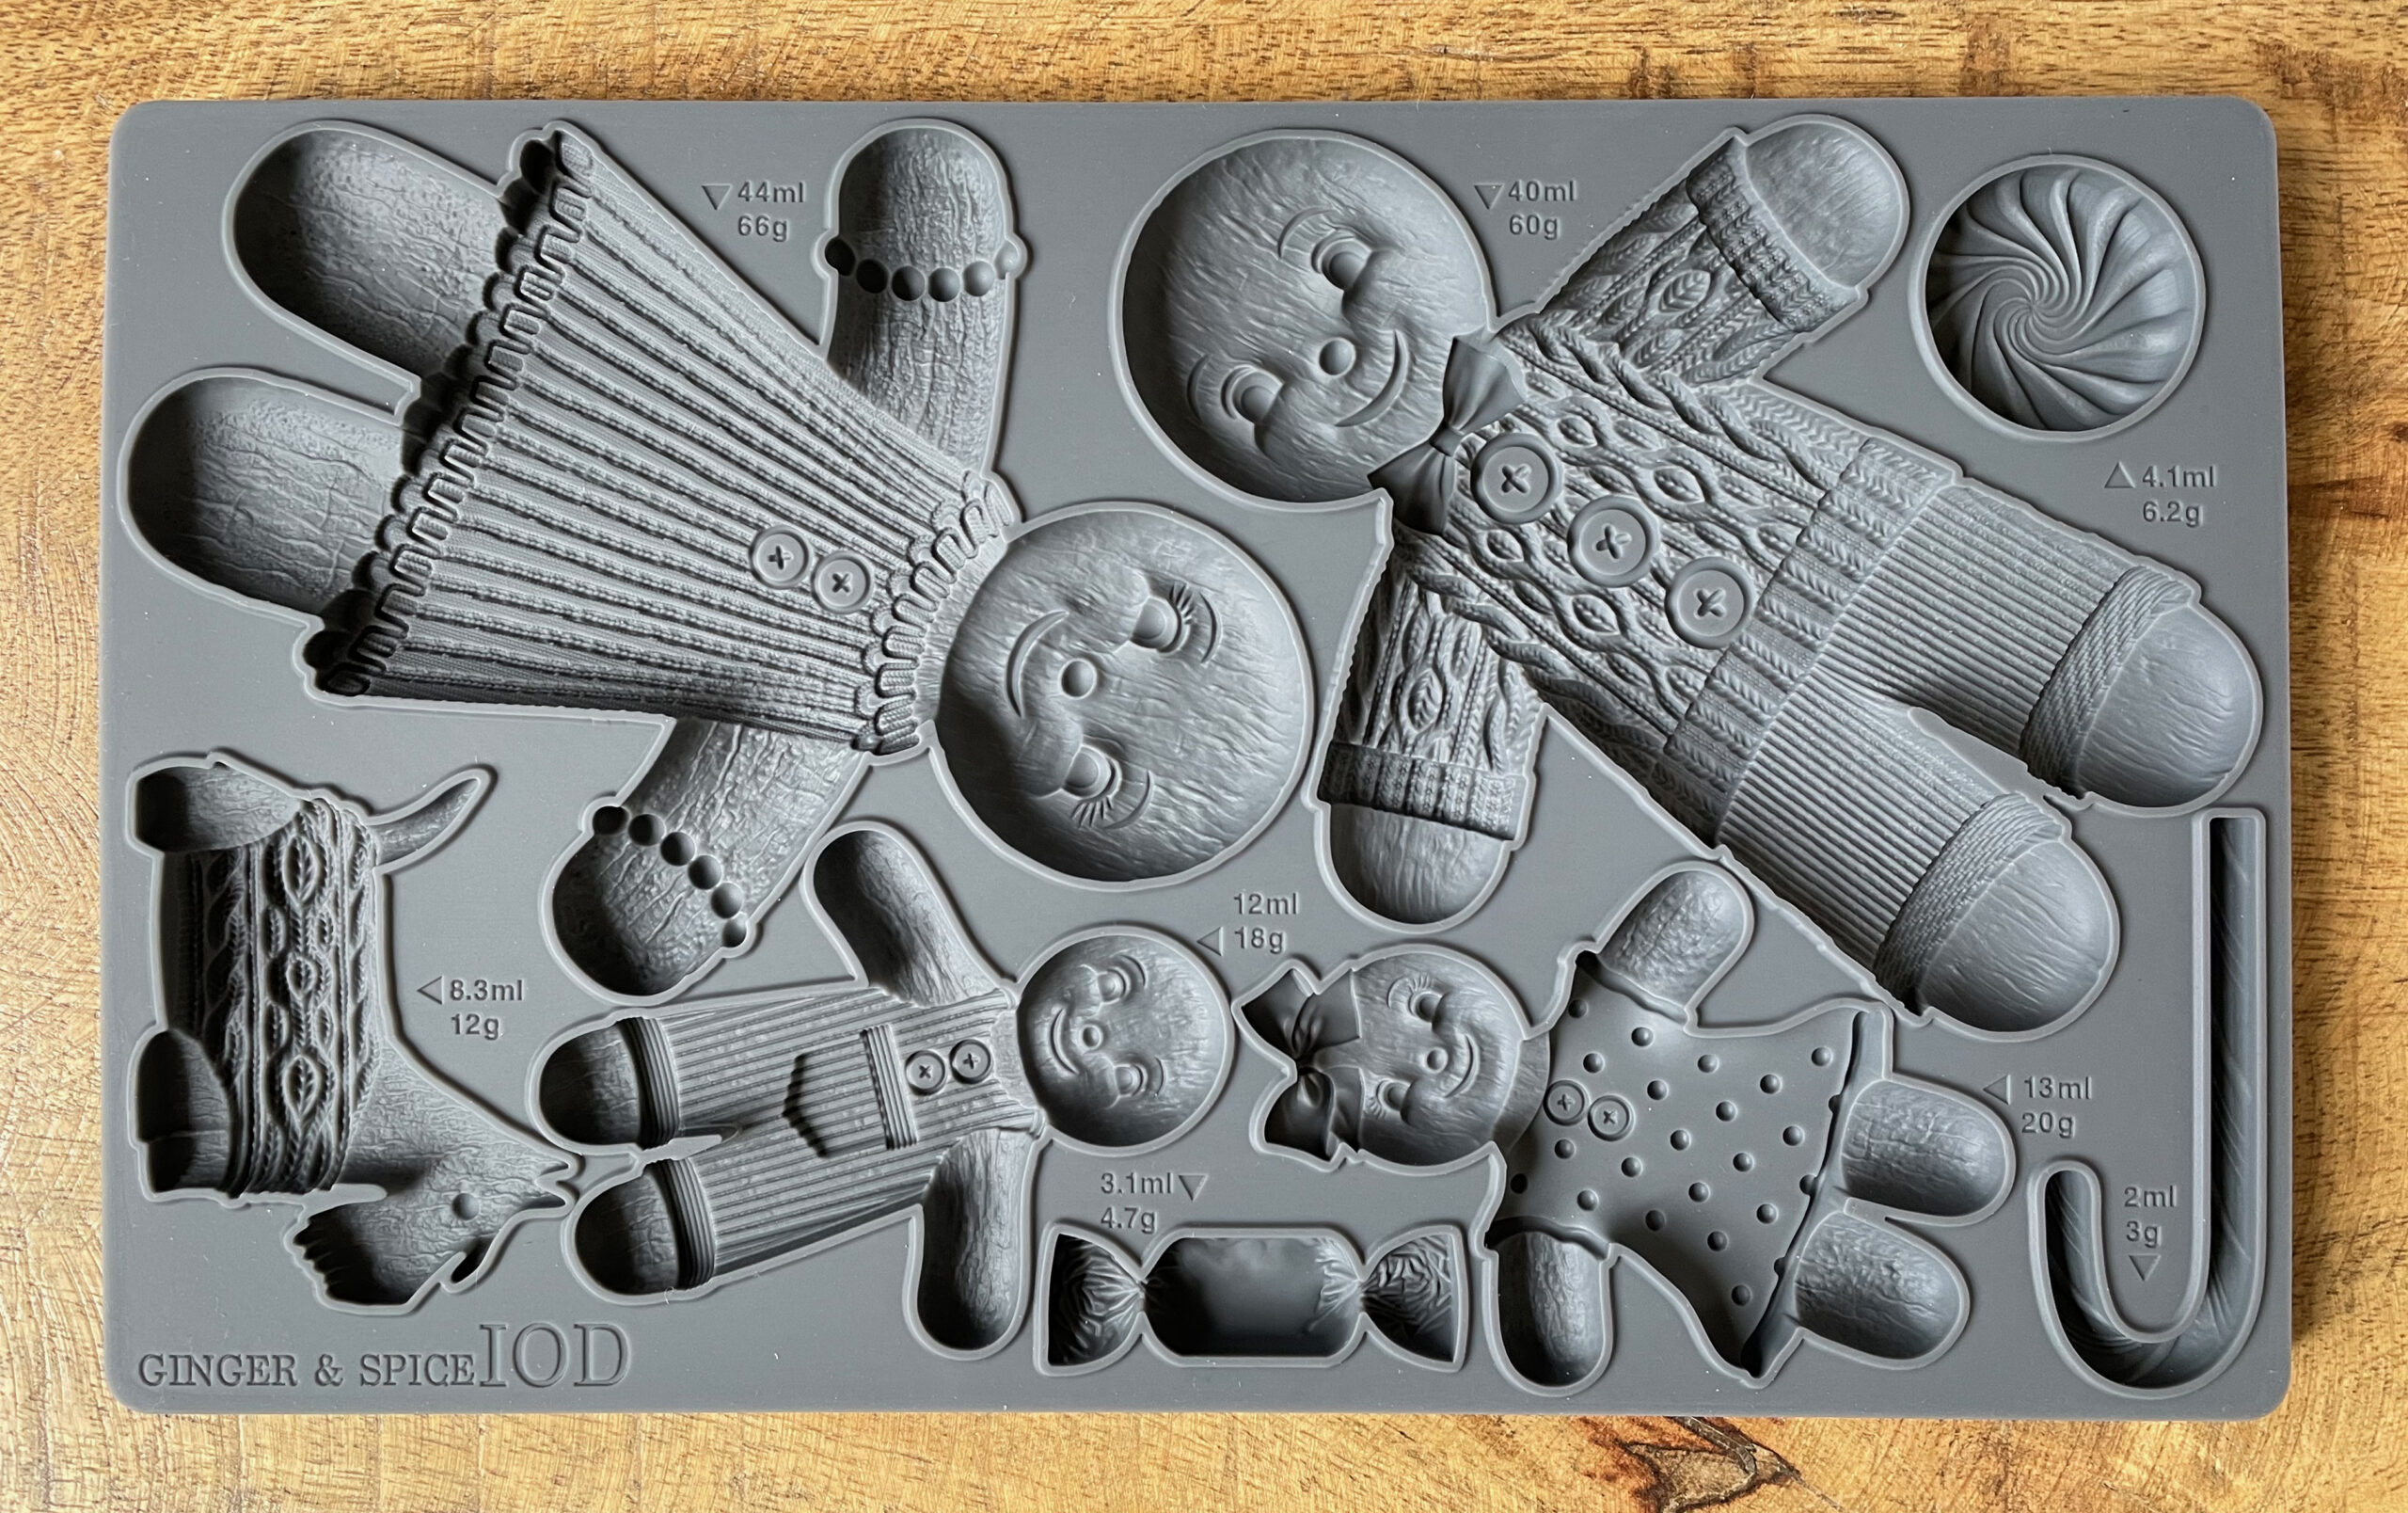 Our NEW Moulds are out! Have - IOD - Iron Orchid Designs